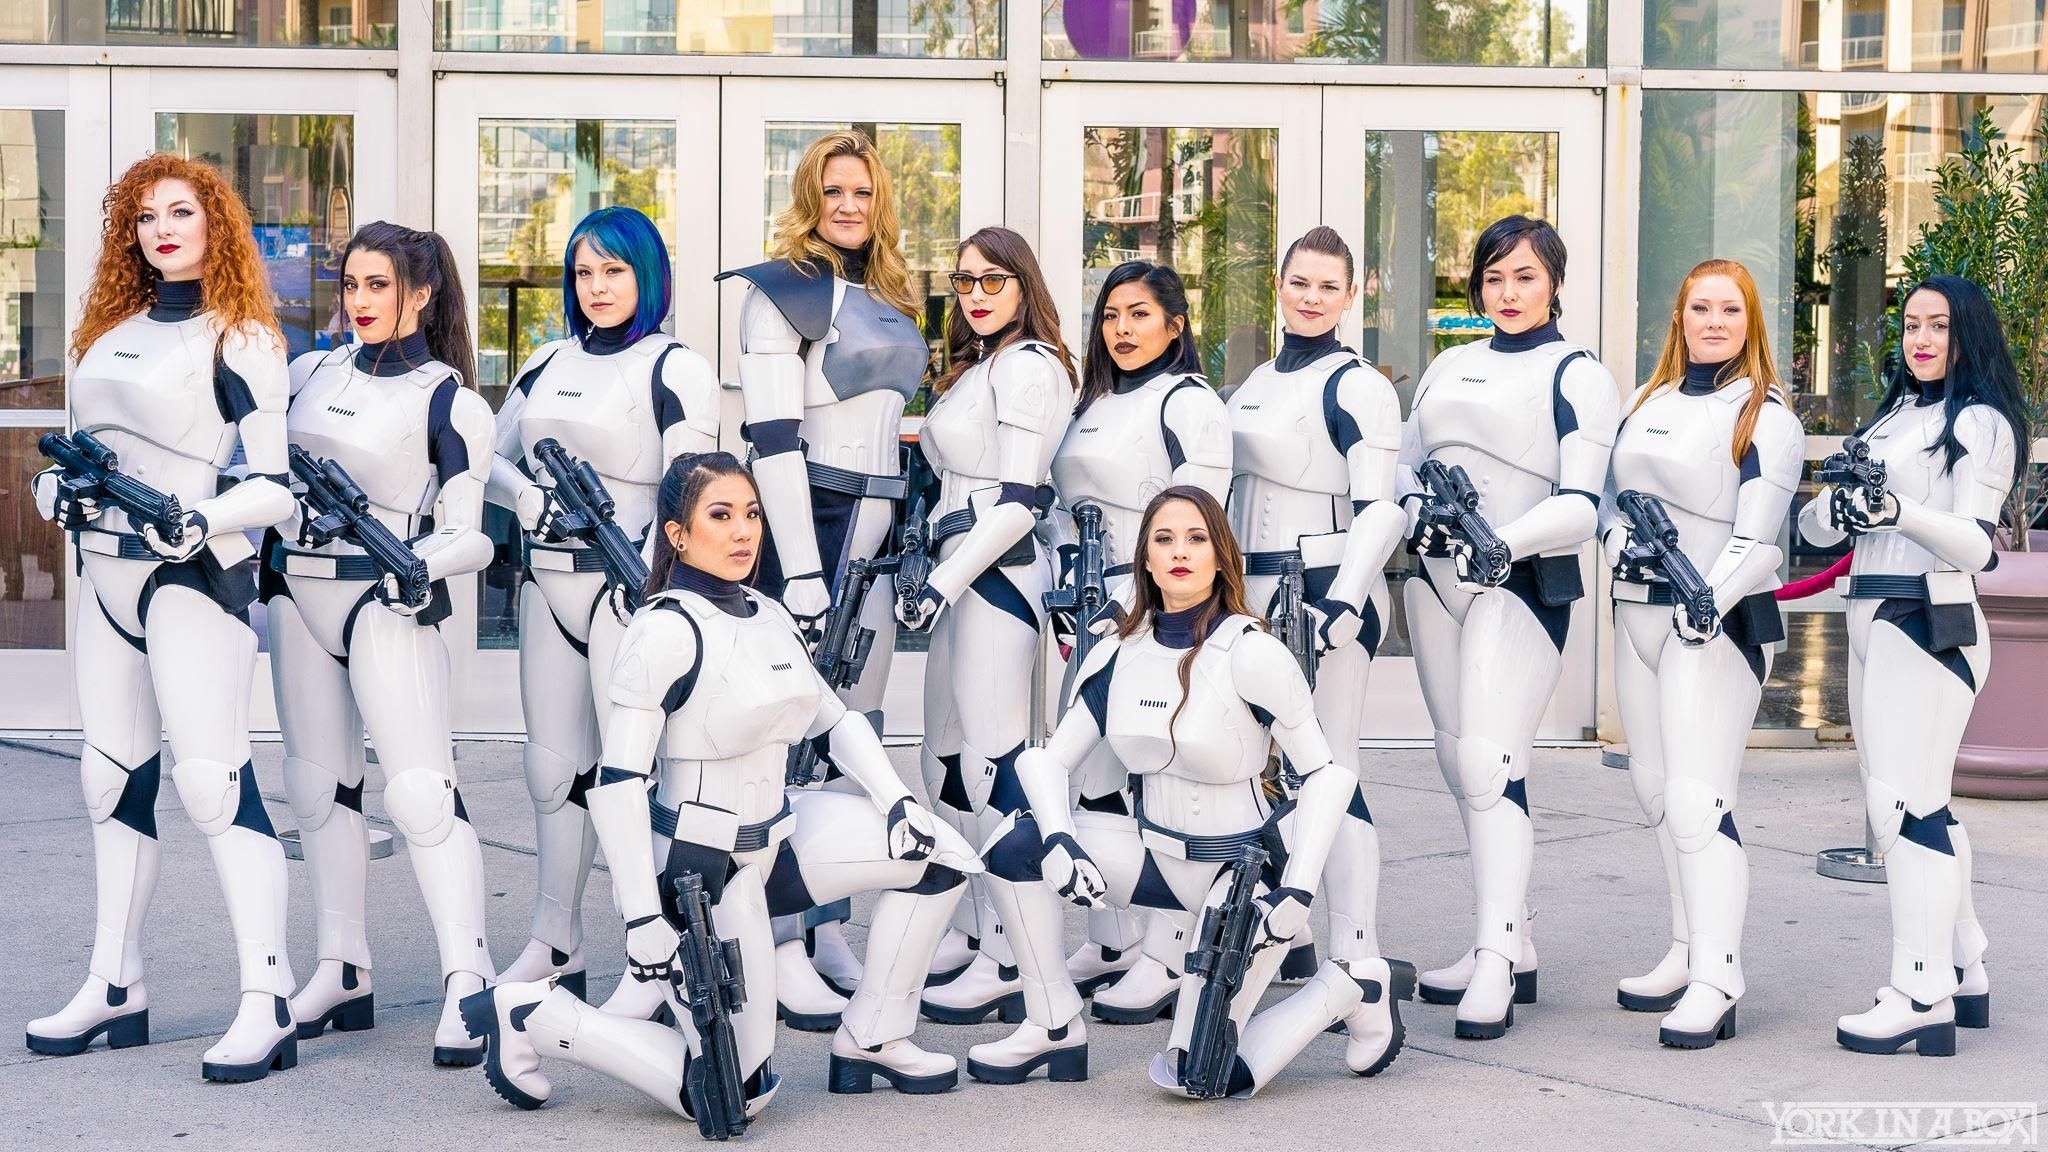 What it's like to wear the awesome new FEM7 armor for female stormtroopers